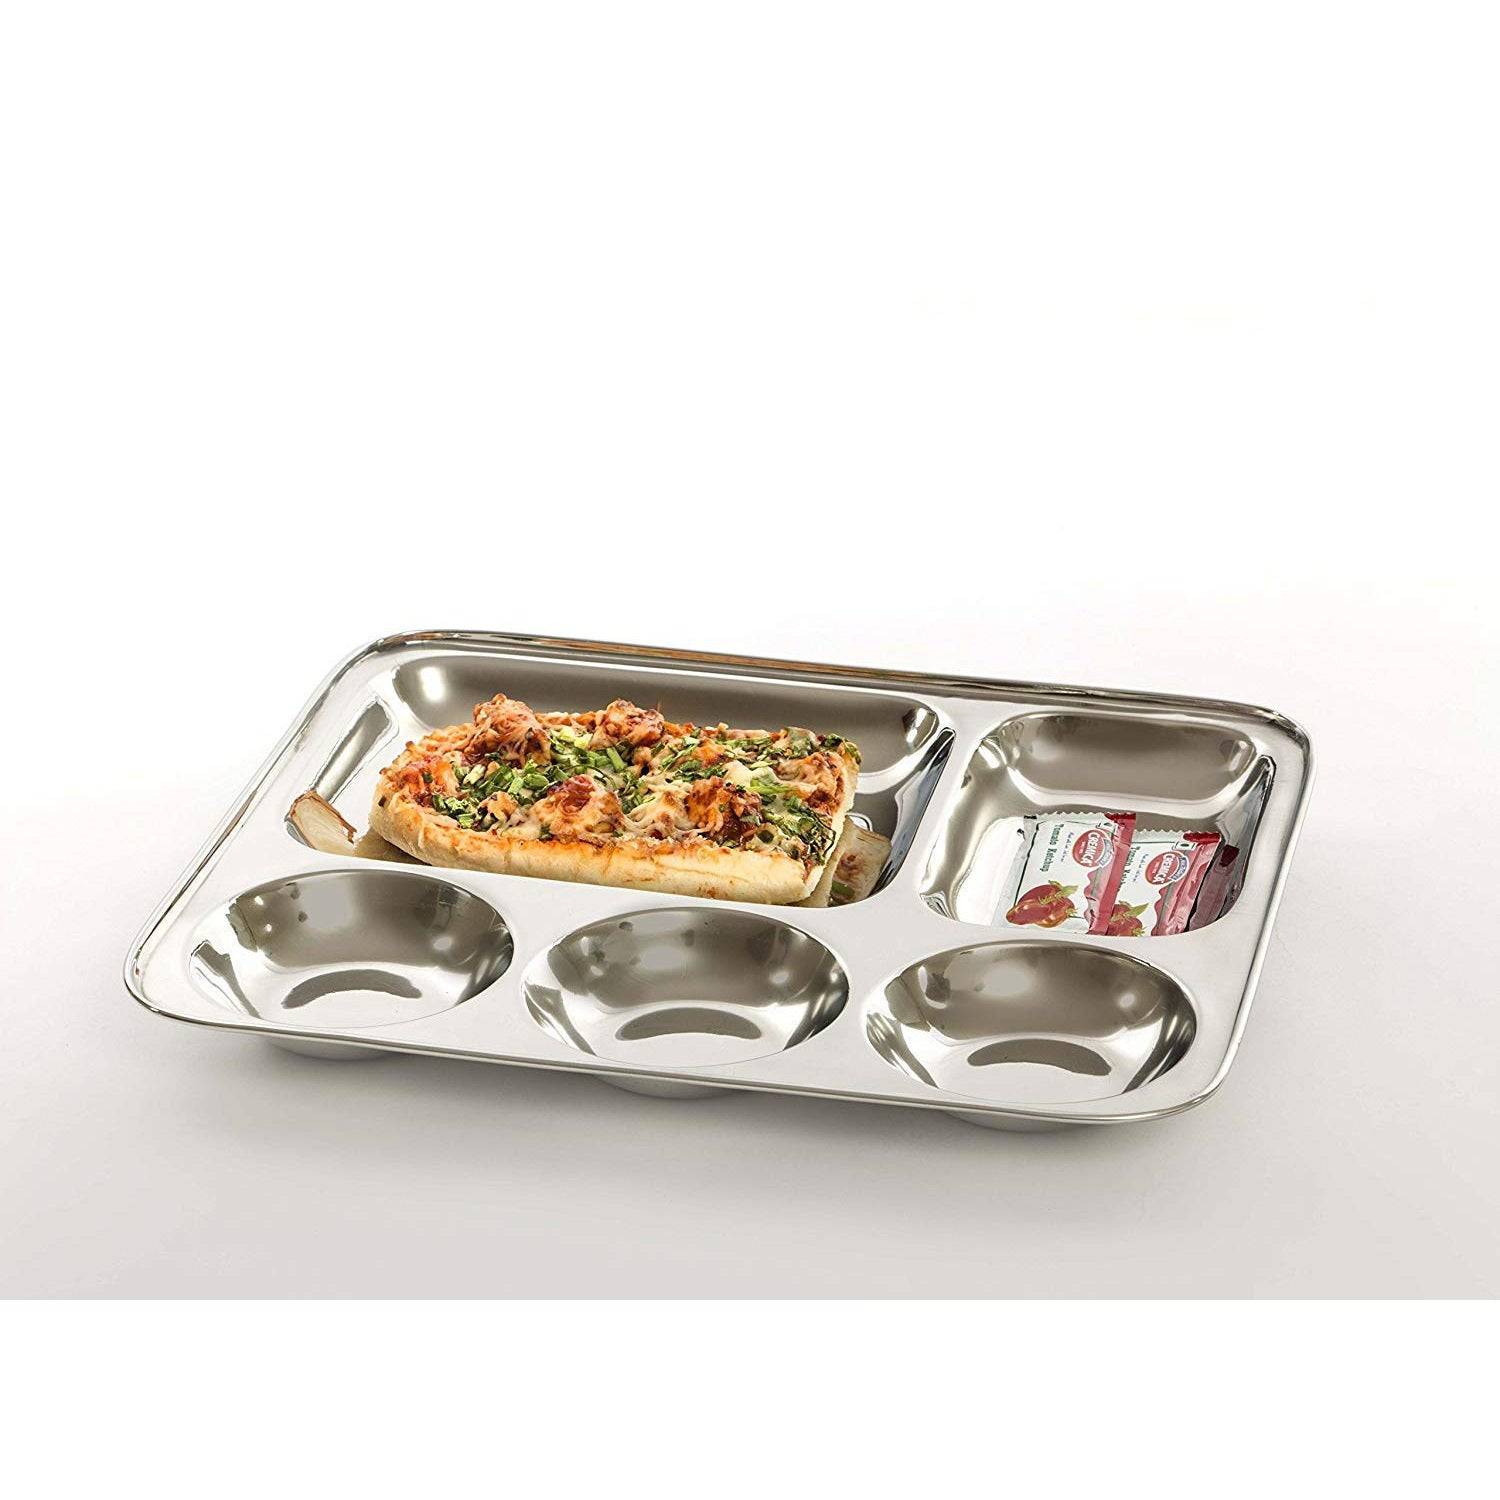 Stainless Steel Dinner plate with 5 Partition - 1 pc